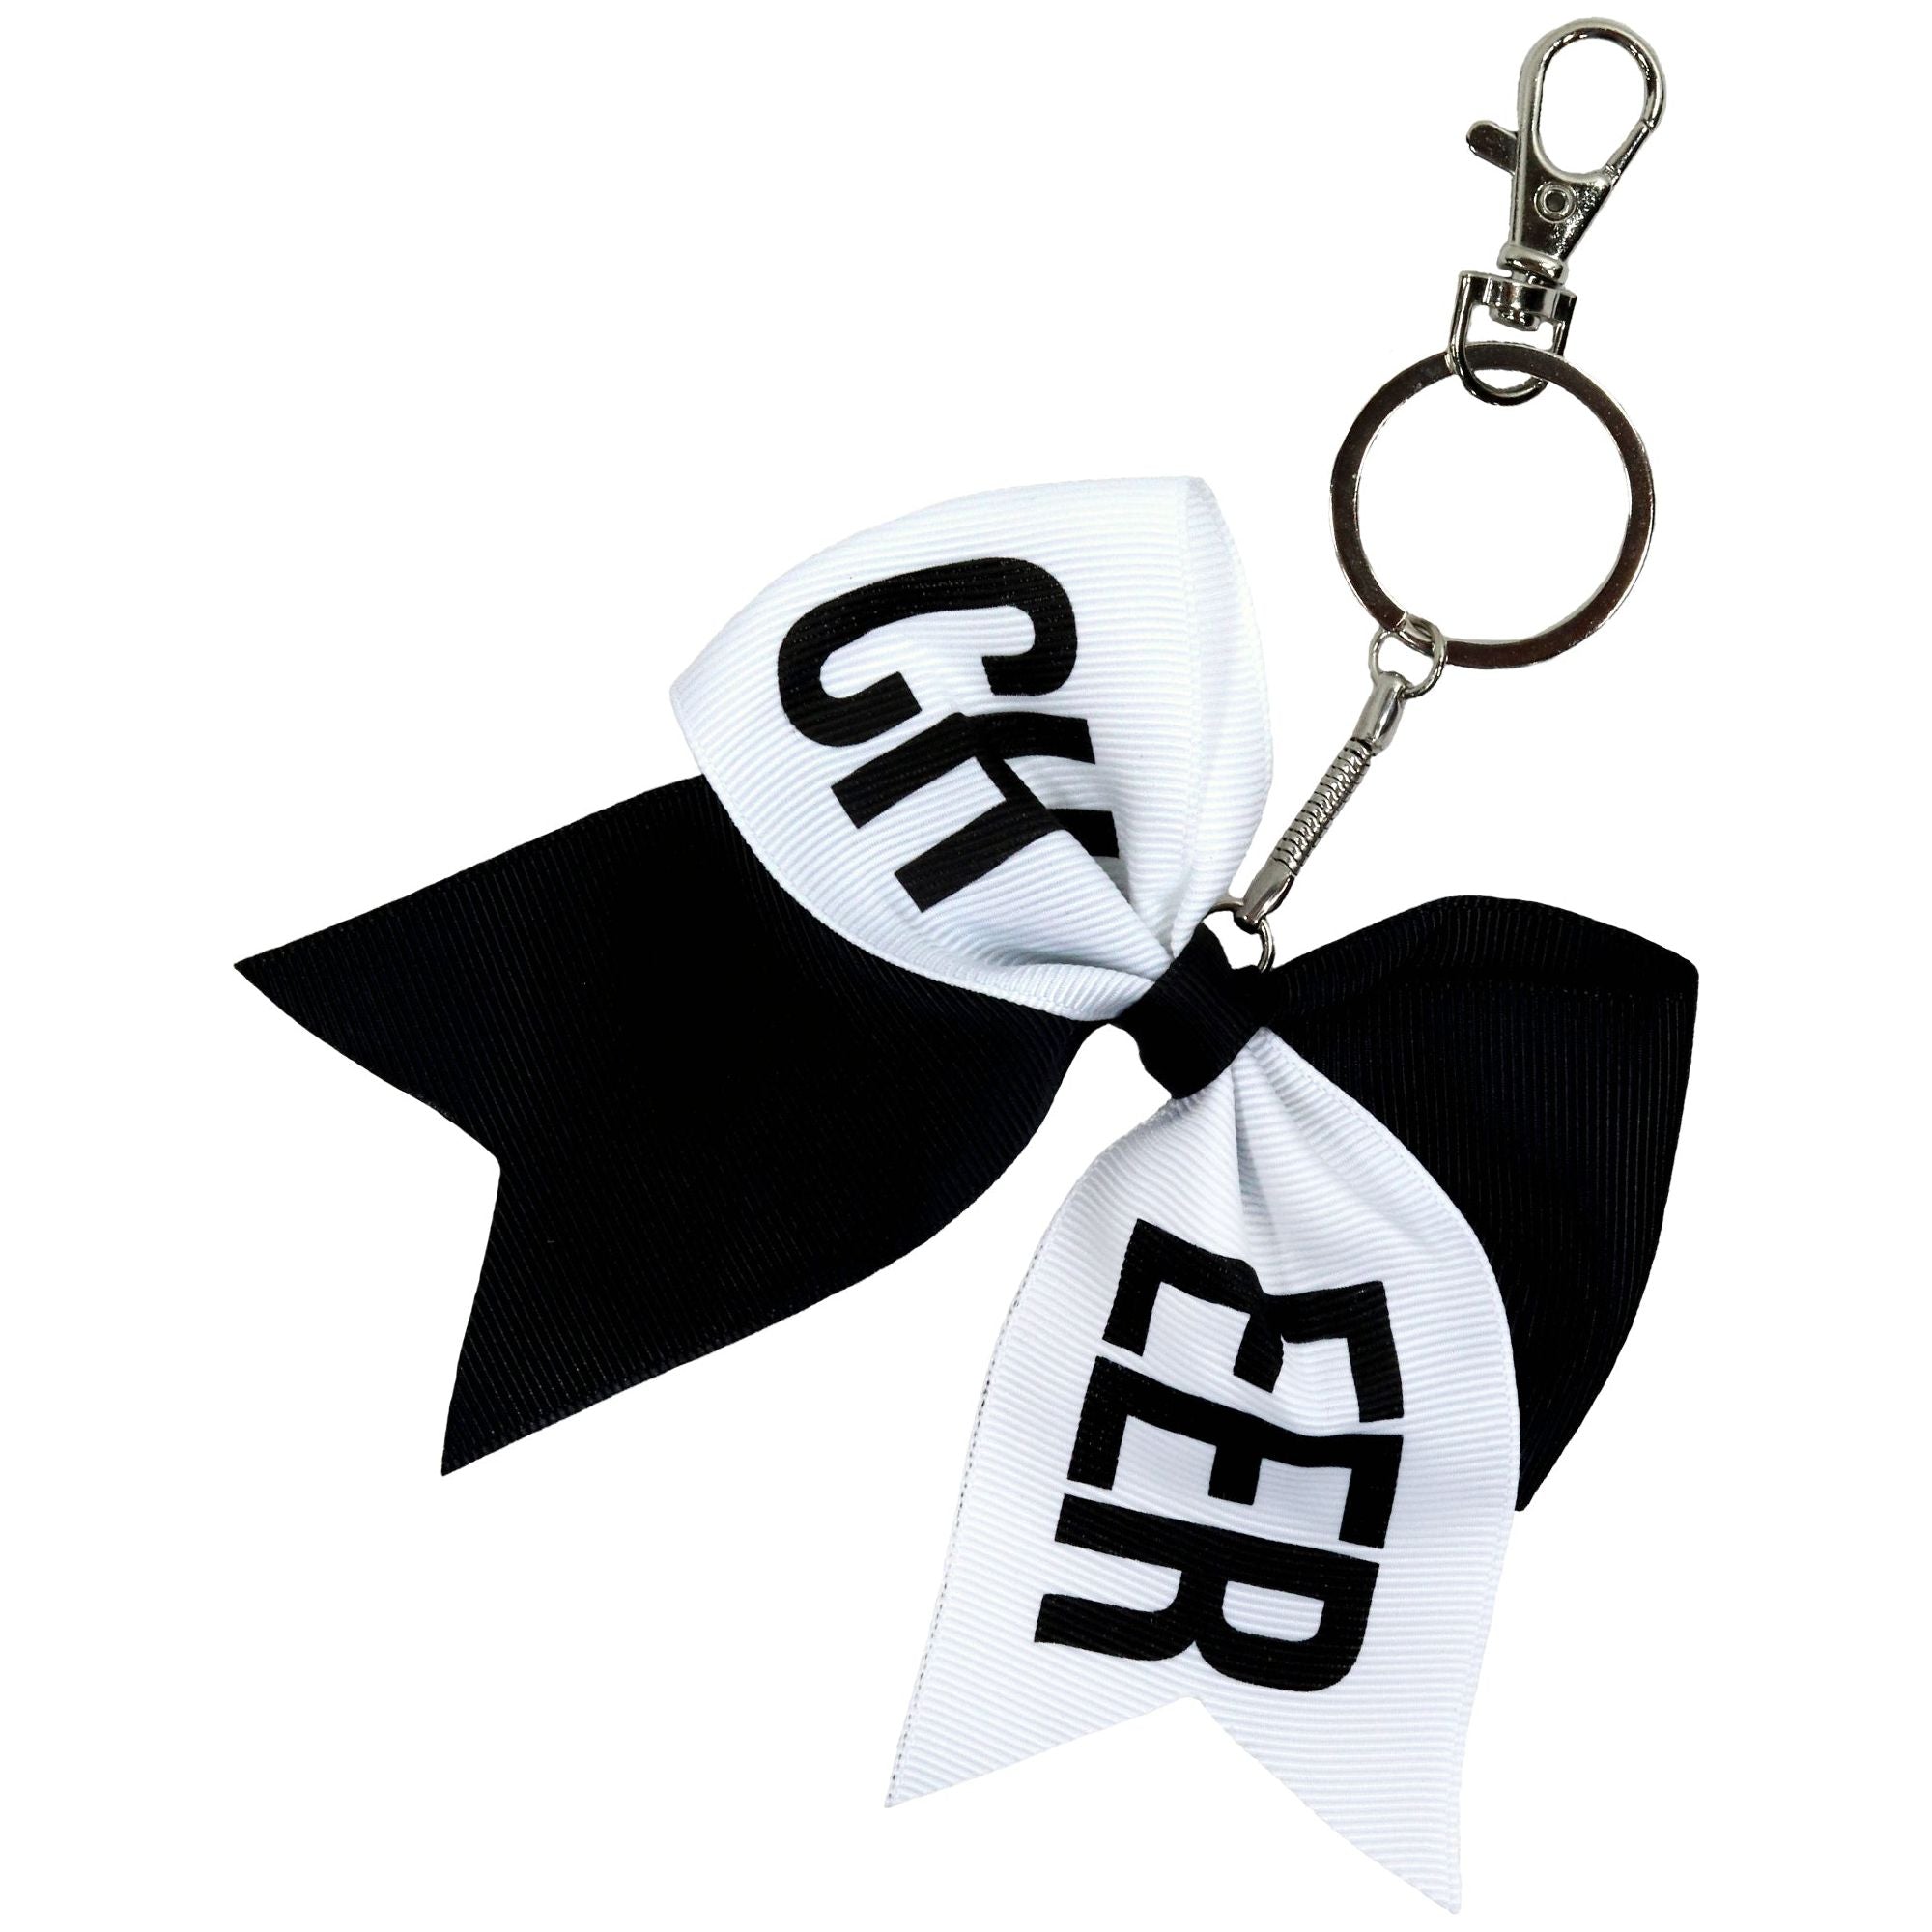 Coach Mini Cheer Bow Keychains Several Options See Photos 